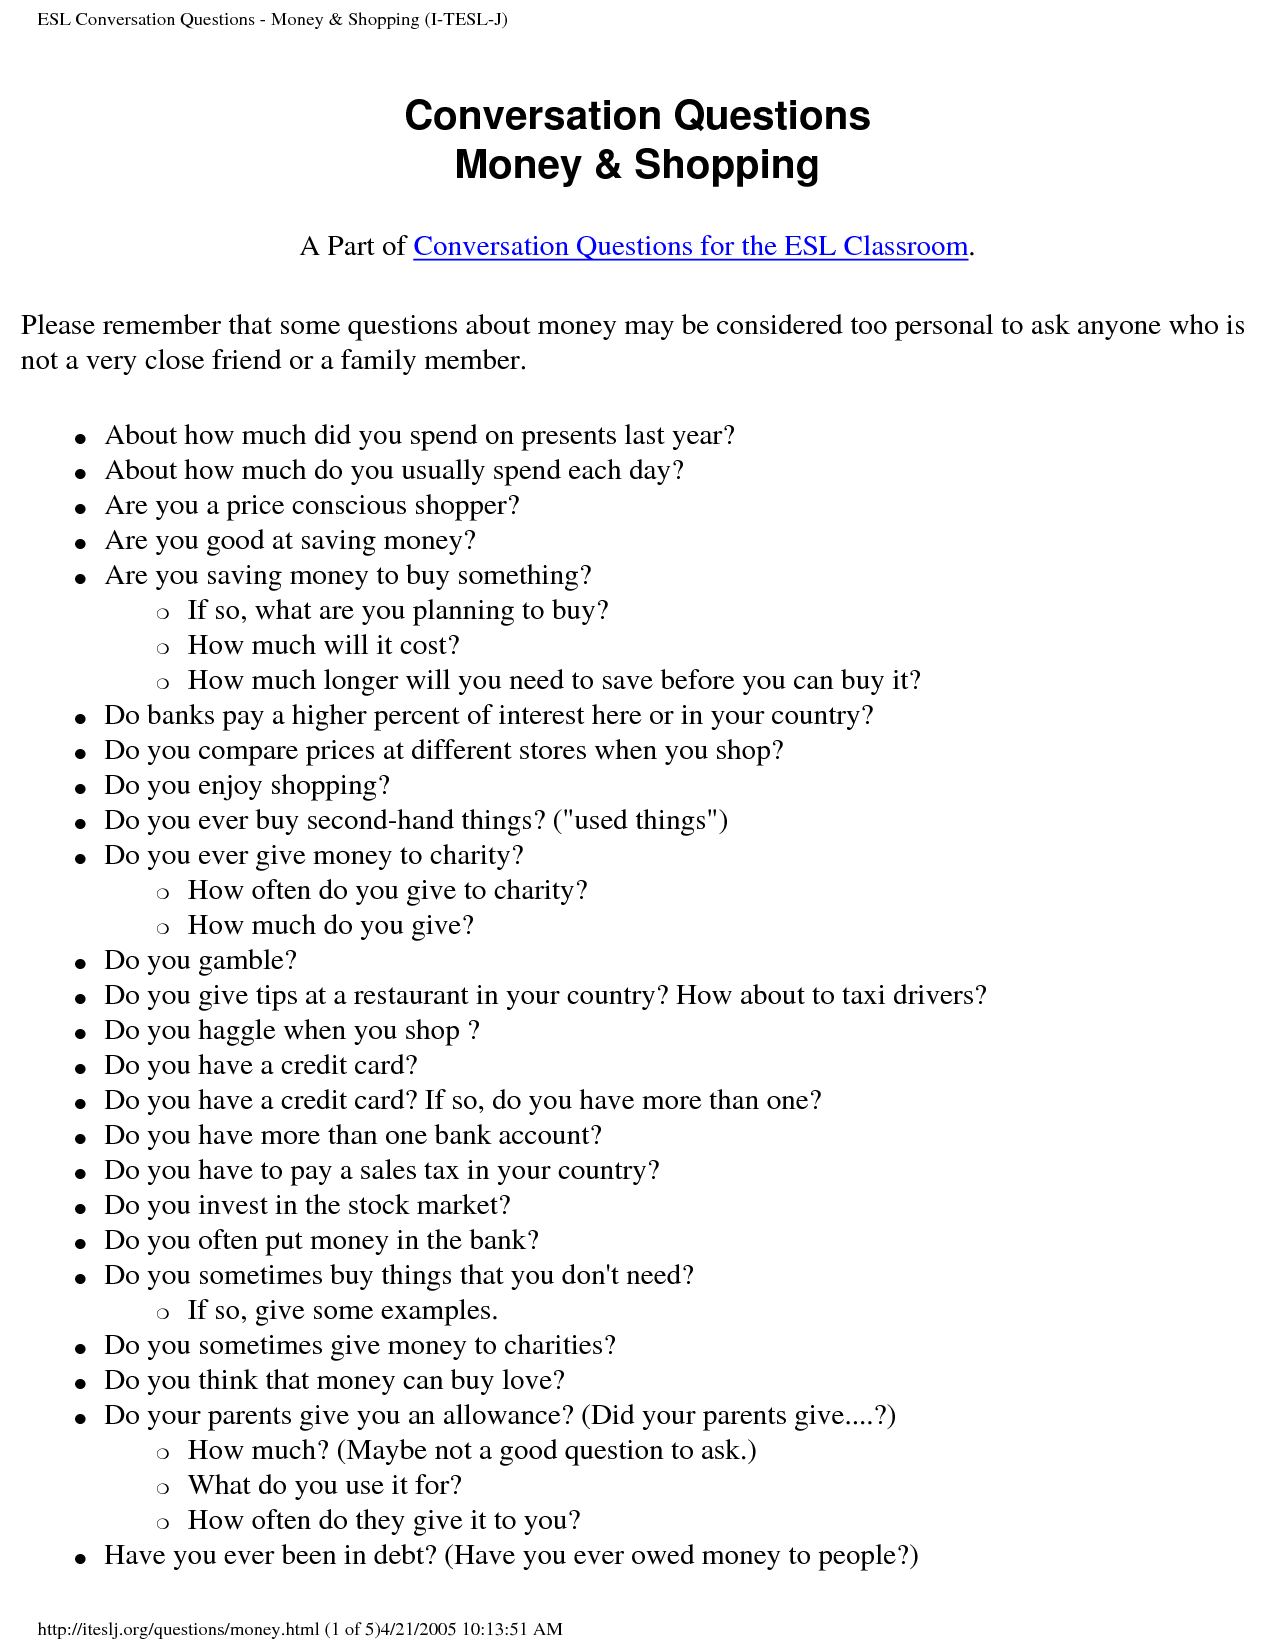 19 Best Images of English Dialogue Worksheets - Writing Dialogue